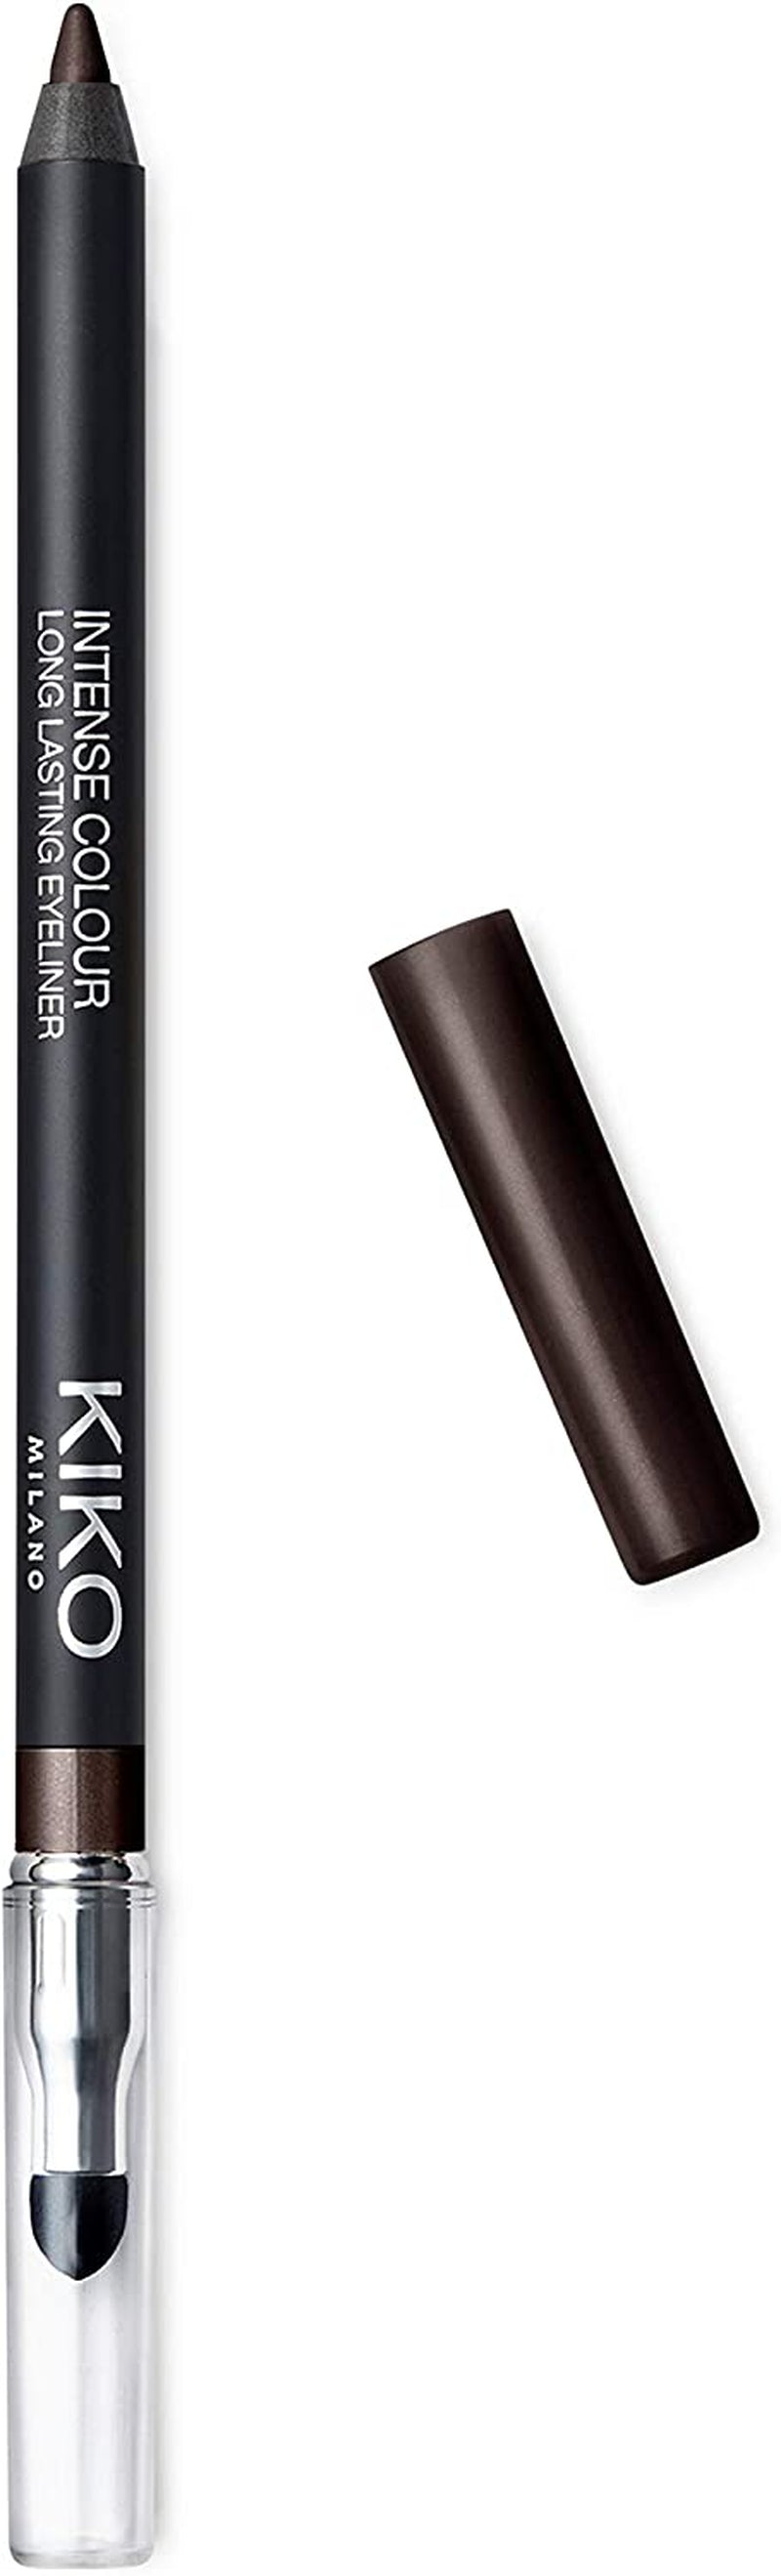 KIKO Milano Eyeliner - Intense Colour Long Lasting Eyeliner 06 | Intense and Smooth-Gliding Outer Eye Pencil with Long Wear